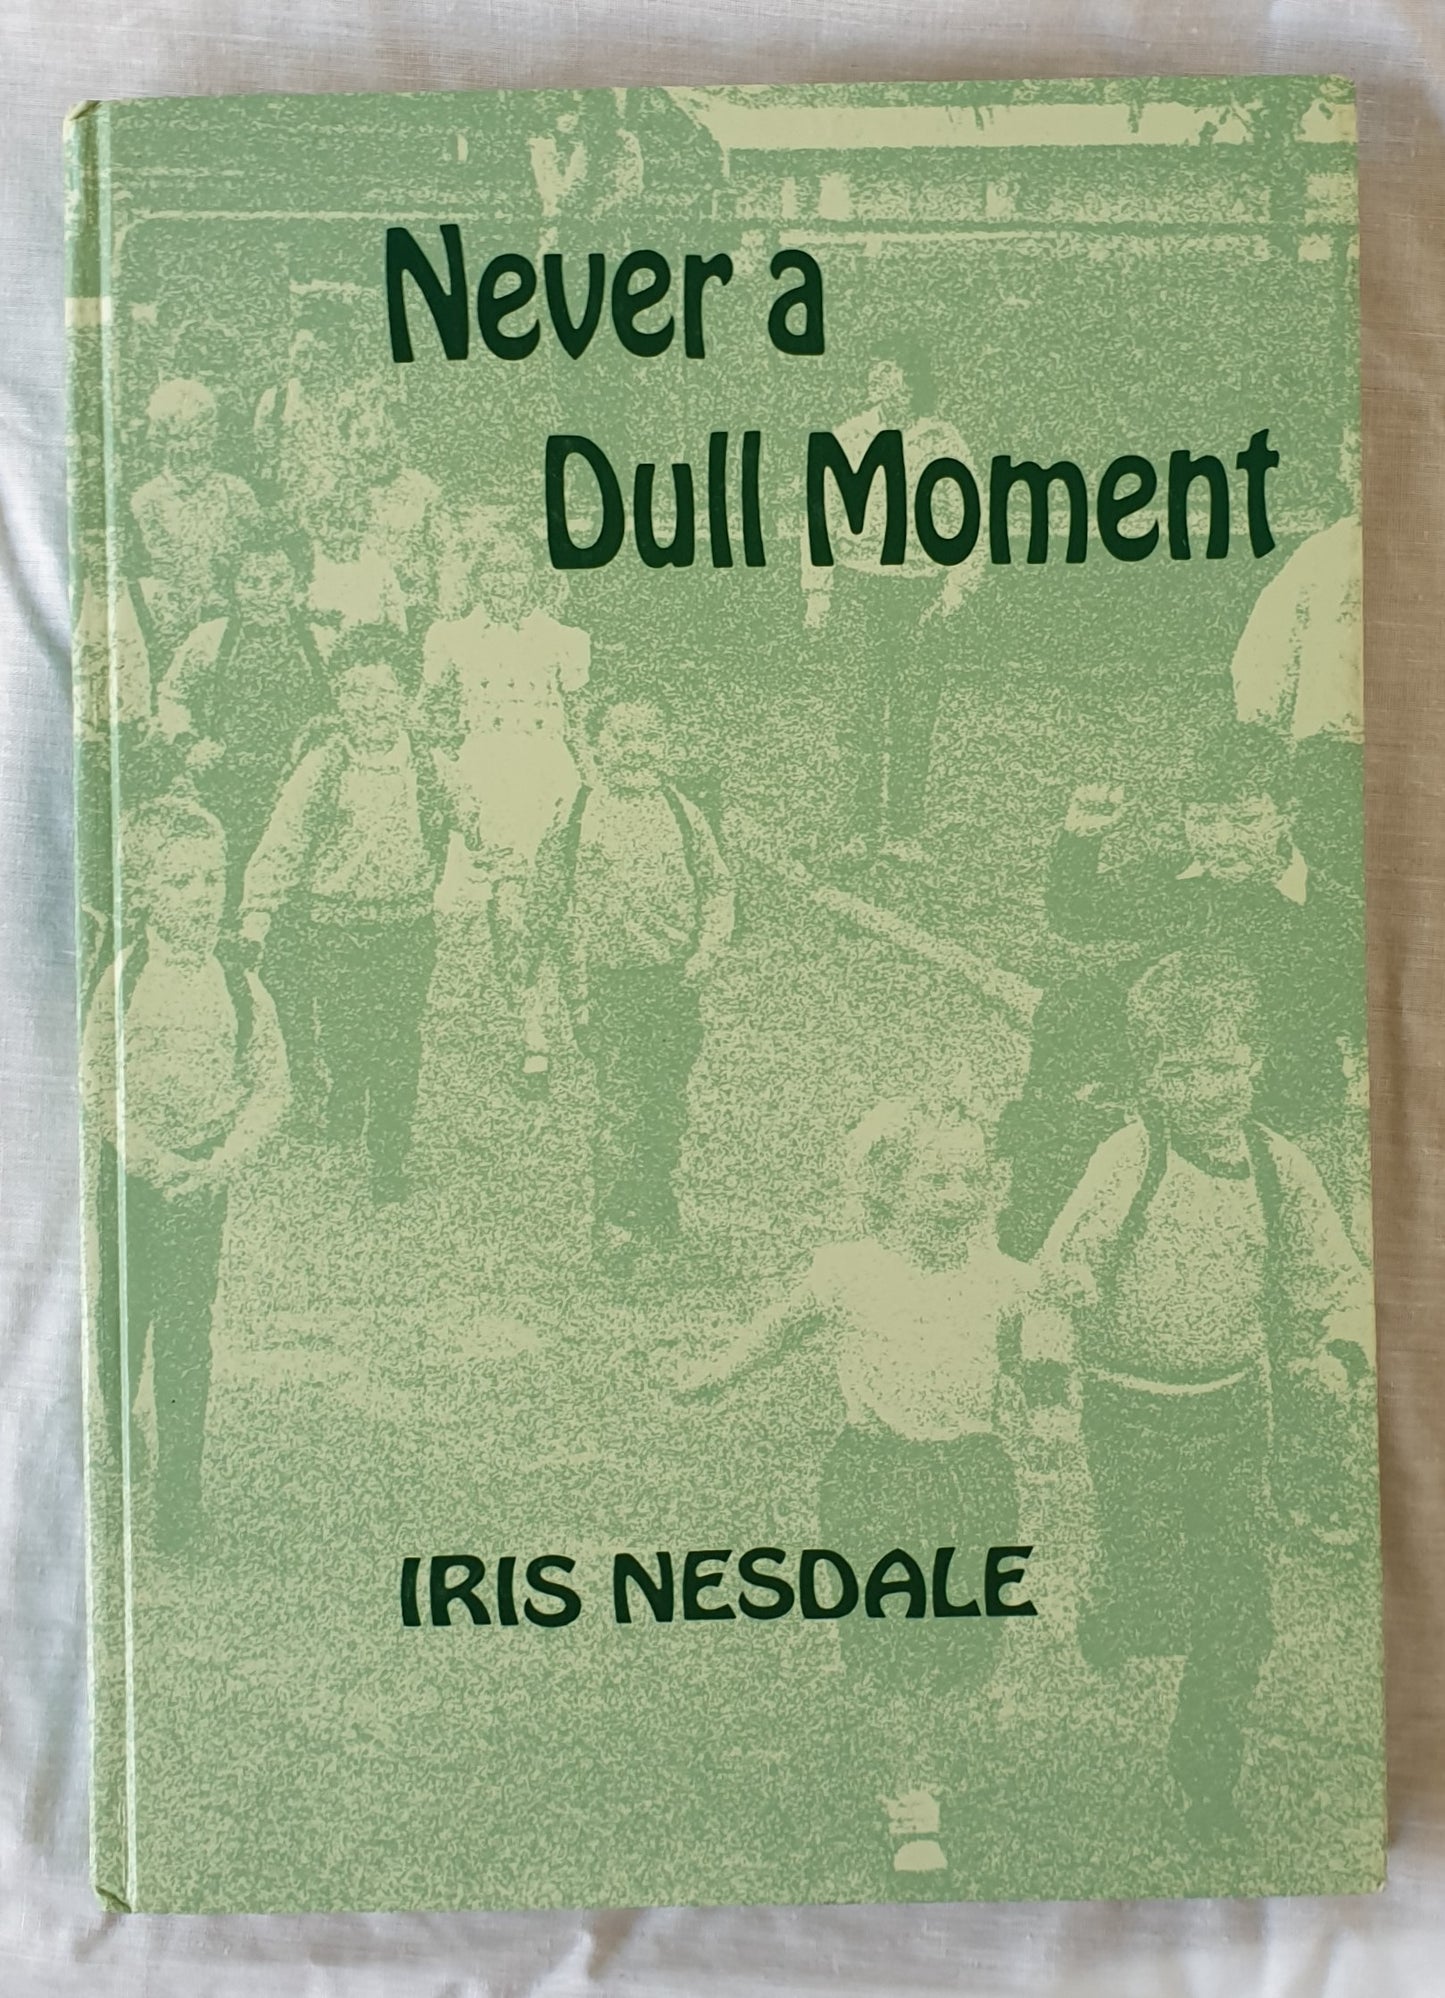 Never a Dull Moment by Iris Nesdale